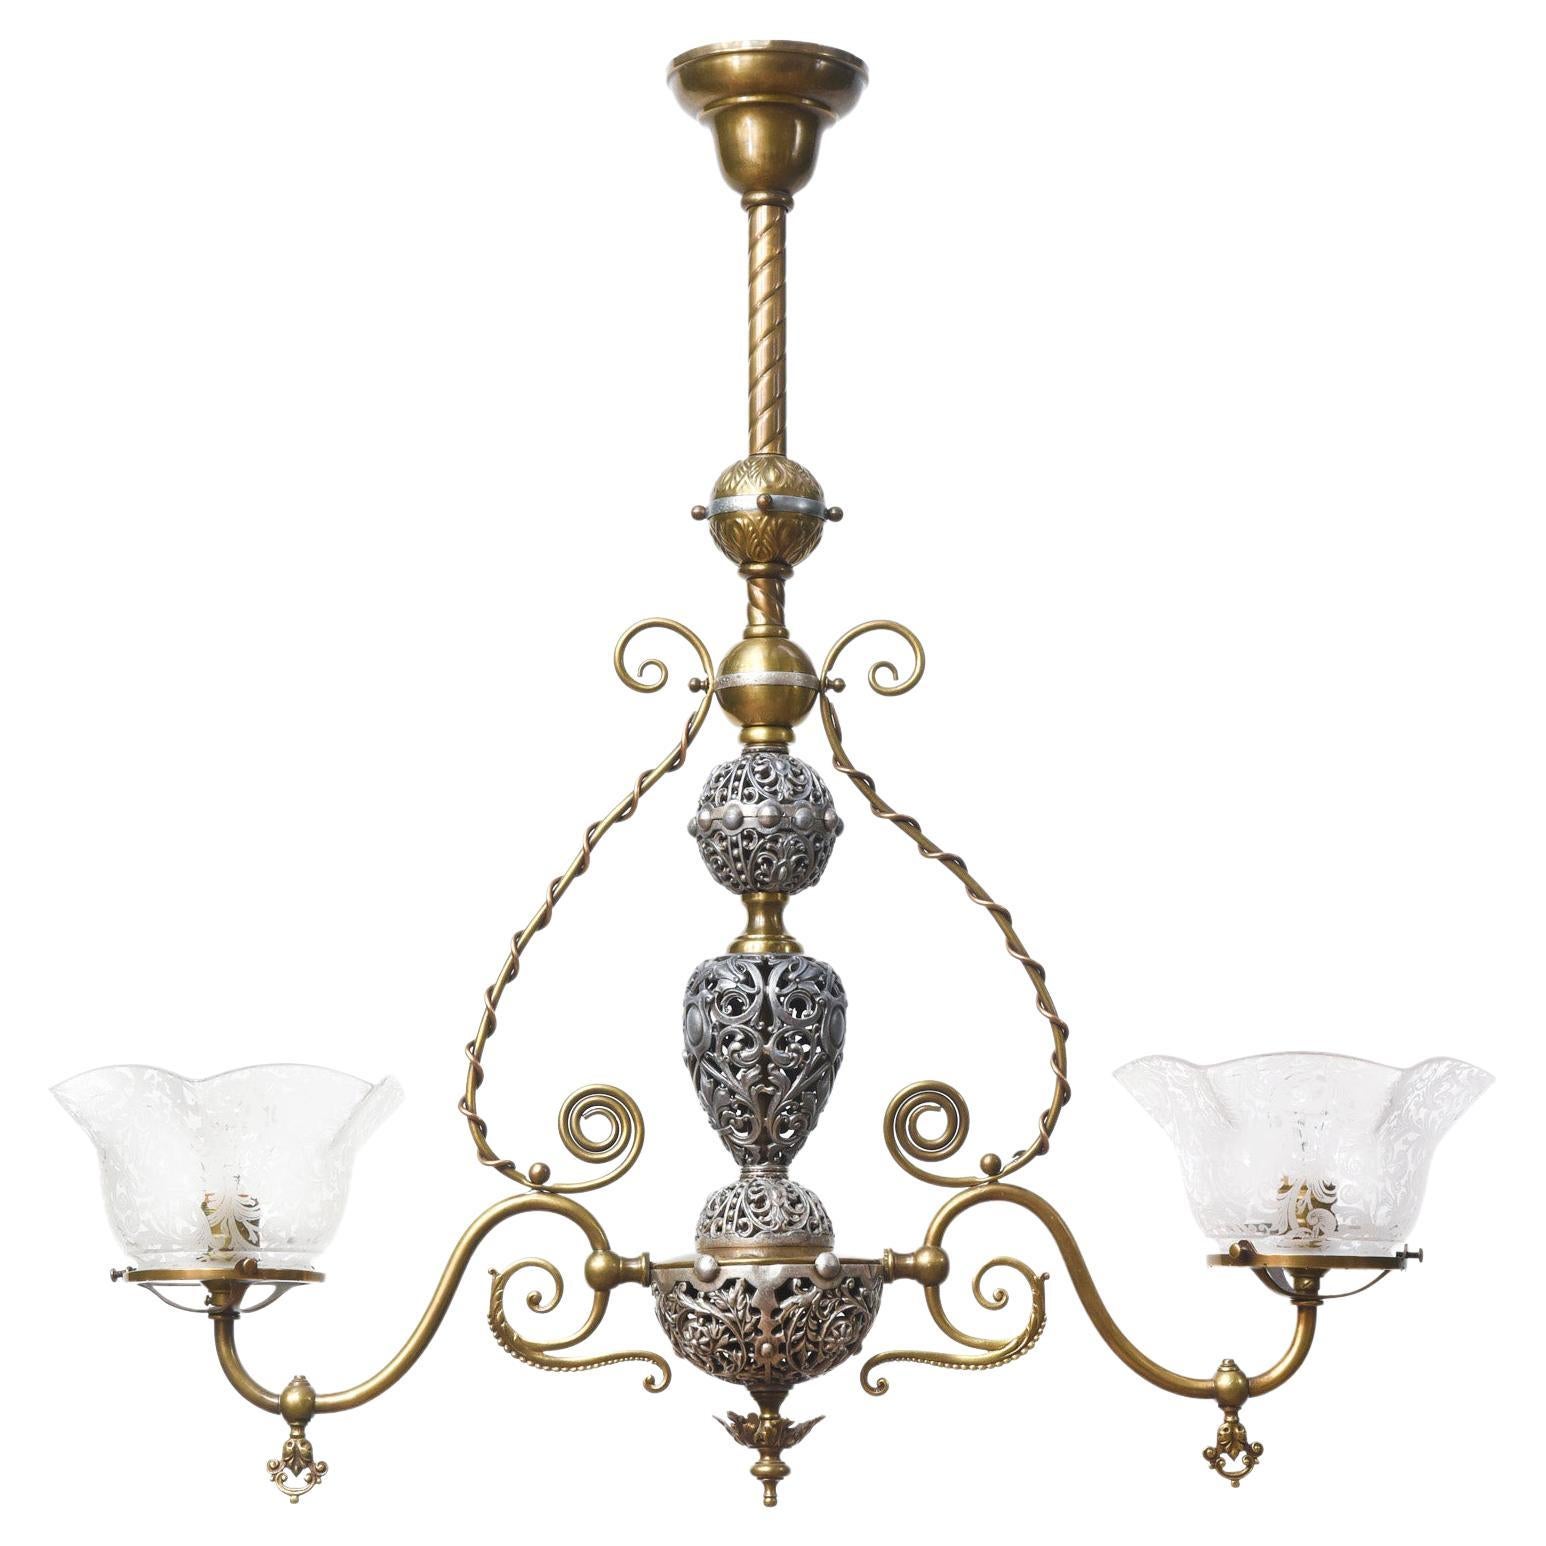 Two Light Victorian Brass and Nickel Fixture